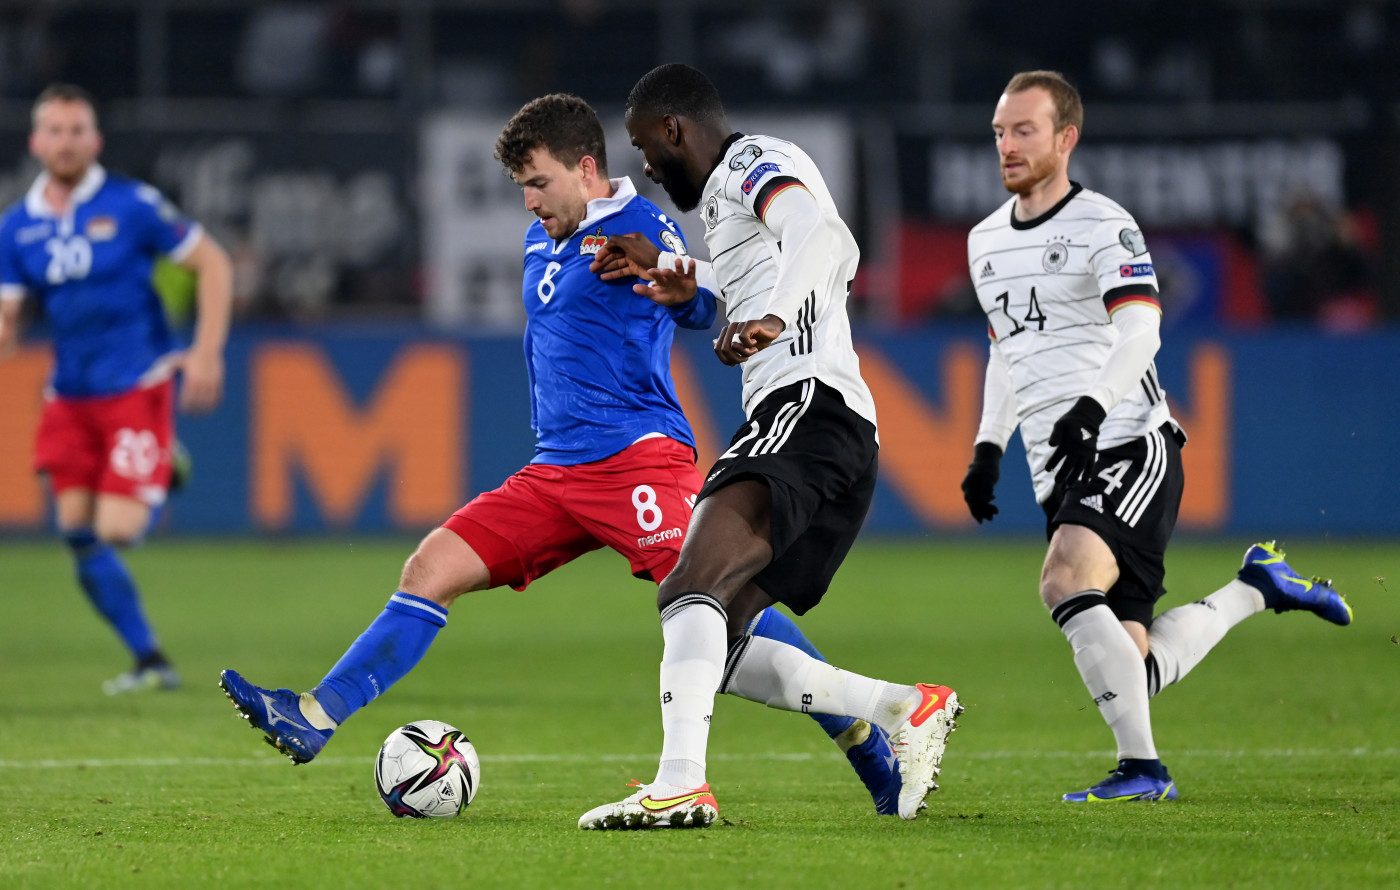 Internationals: Rudiger features in Germany thumping, Azpi helps